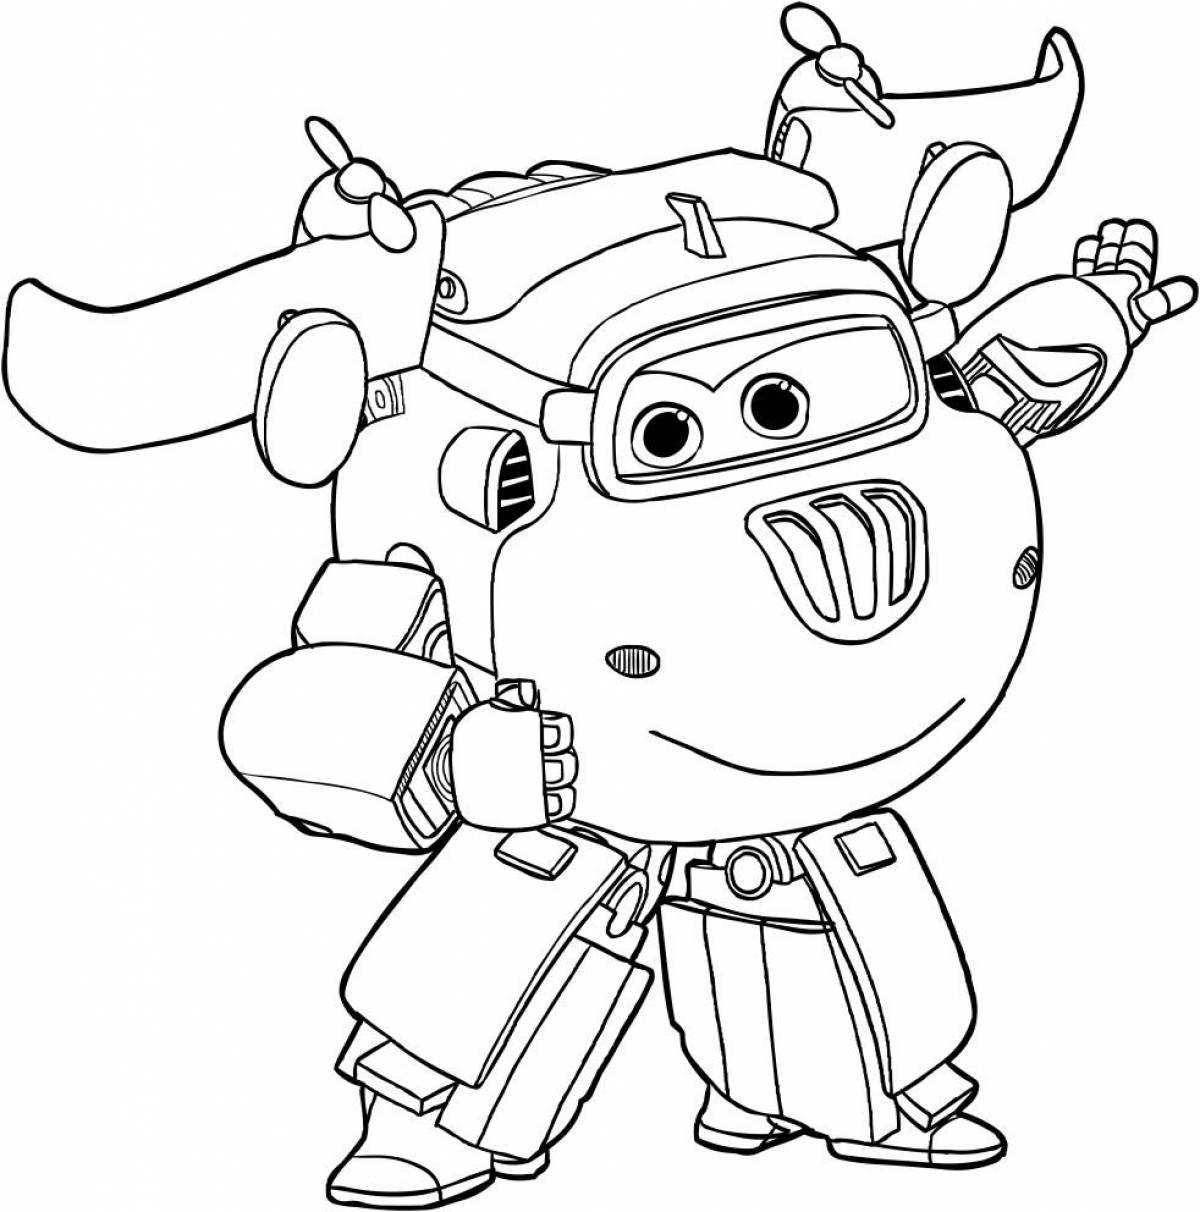 Fabulous super wings coloring pages for kids